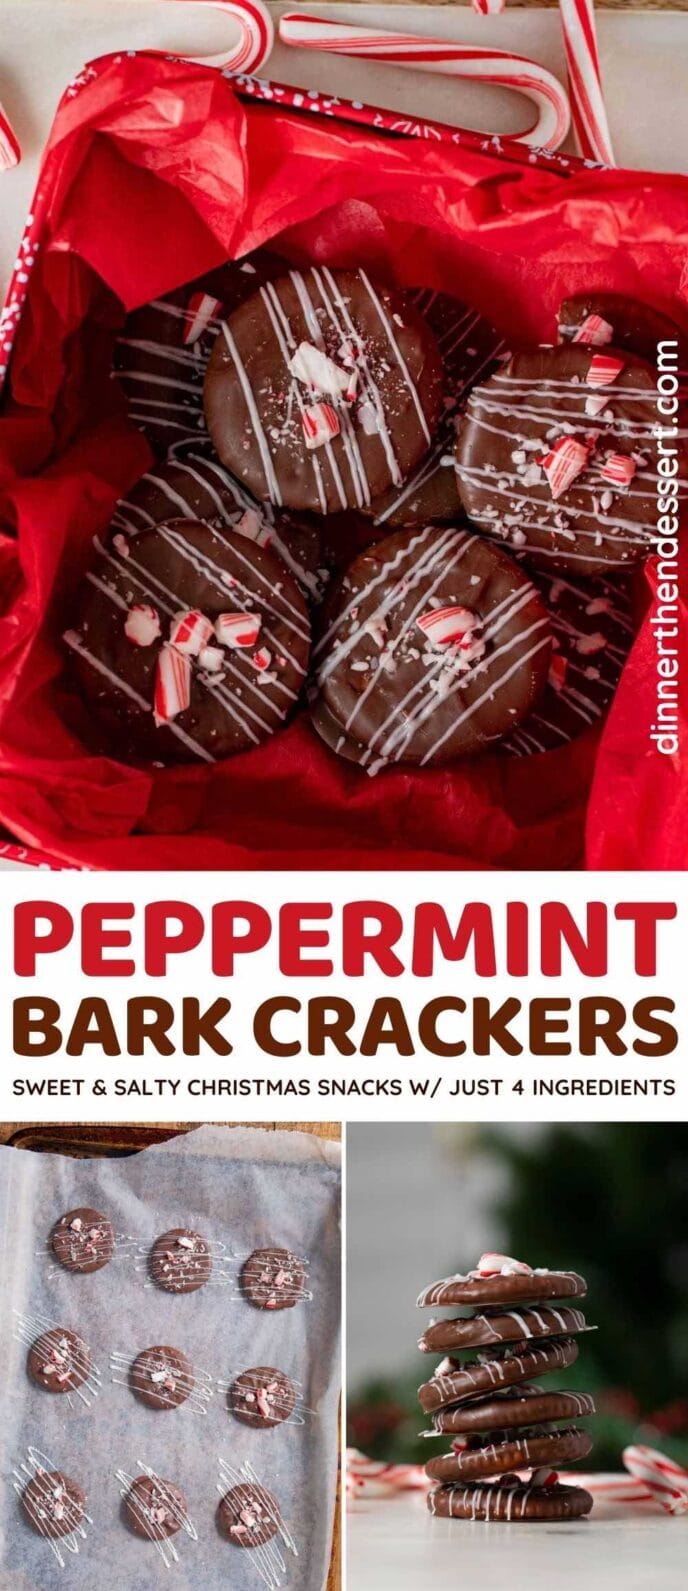 Peppermint Bark Crackers collage